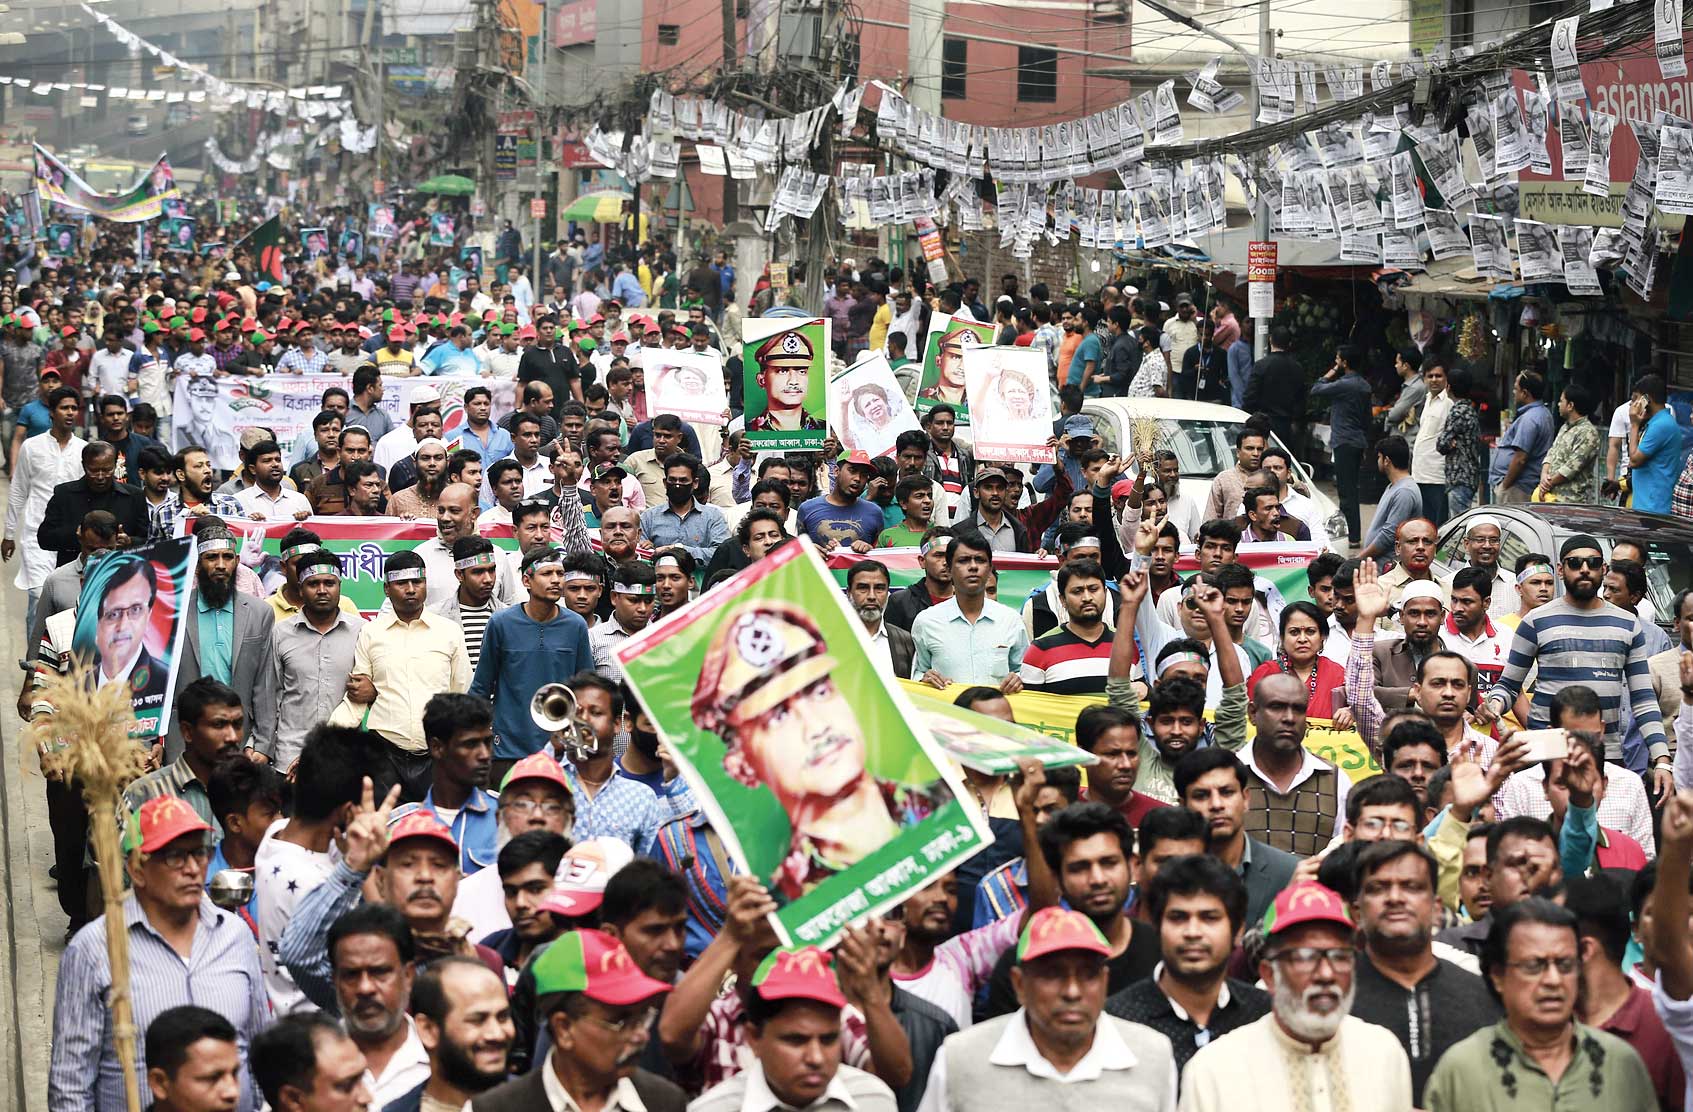 Bangladesh’s Jatiya Oikya Front supporters display pictures of former President Ziaur Rahman and former Prime Minister Khaleda Zia as they march in a rally to mark Victory Day in Dhaka on Sunday. 
